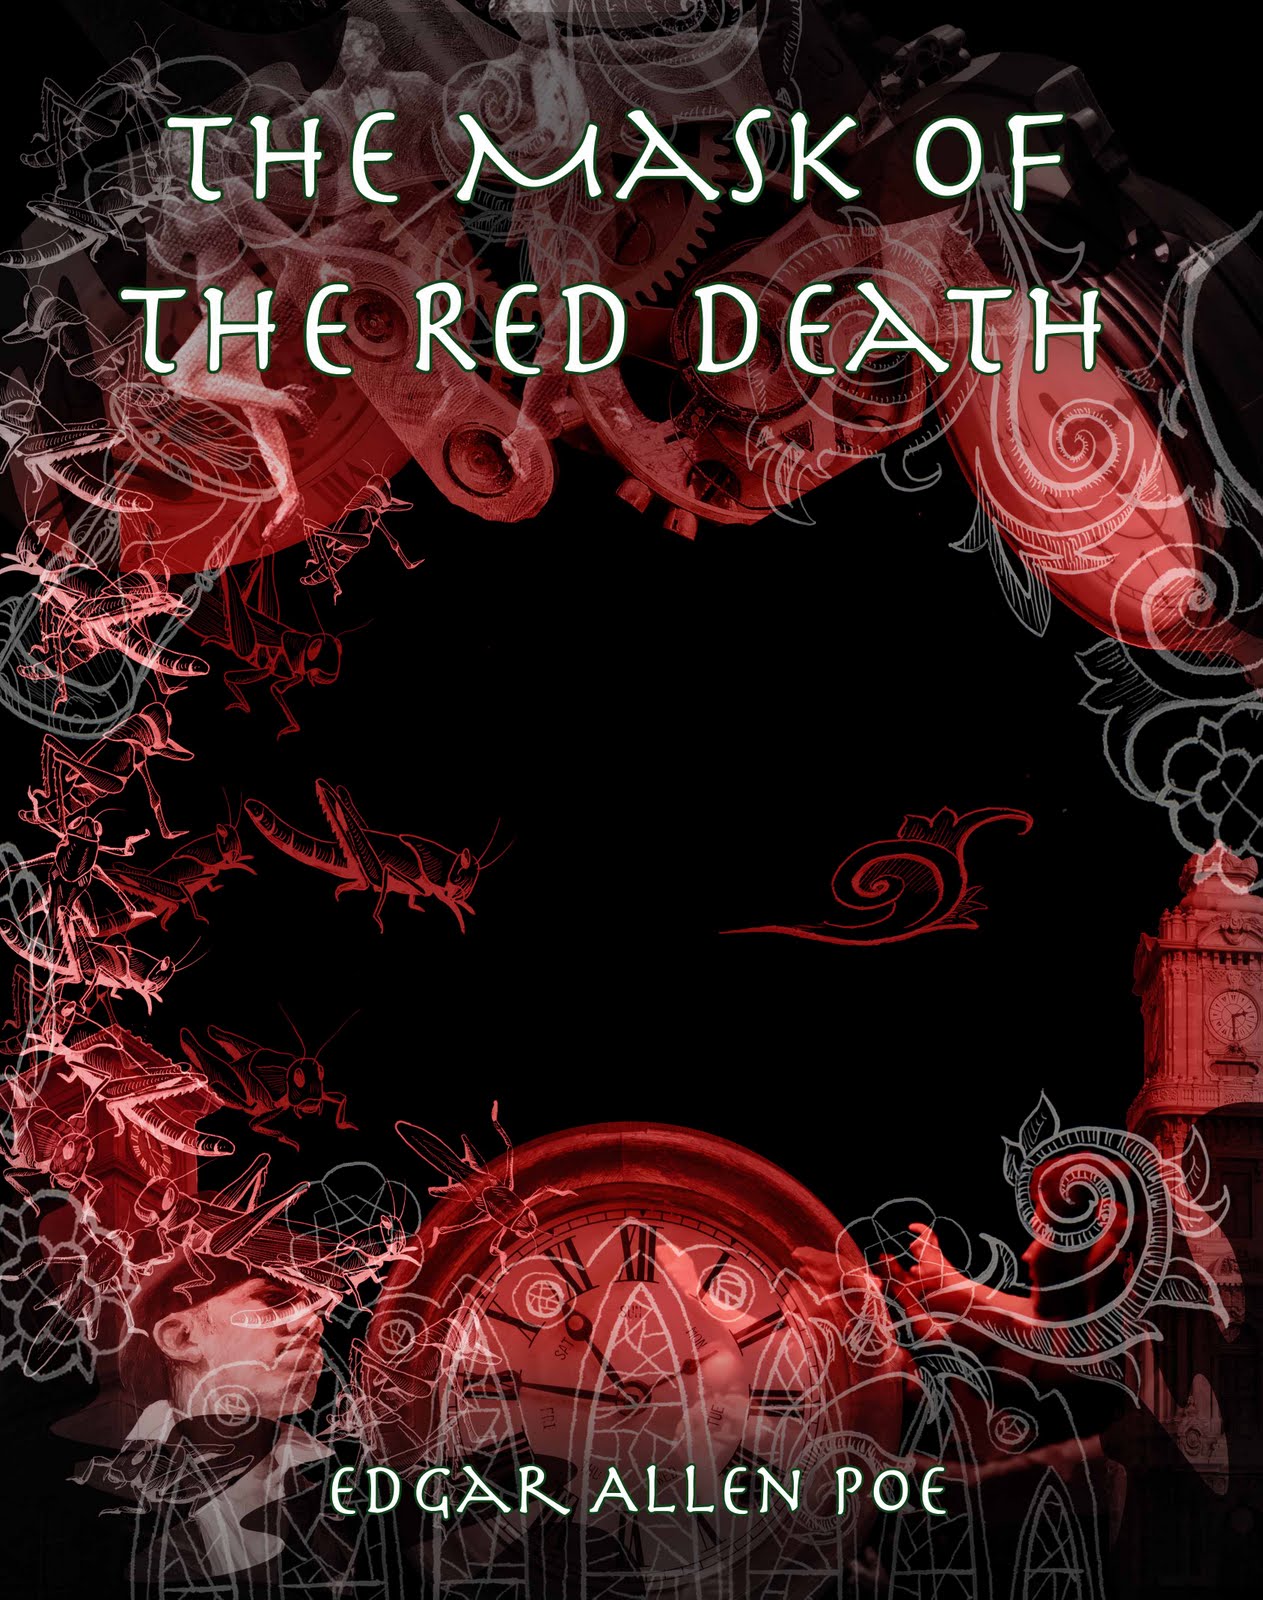 the-masque-of-the-red-death-chapter-one-hachette-uk